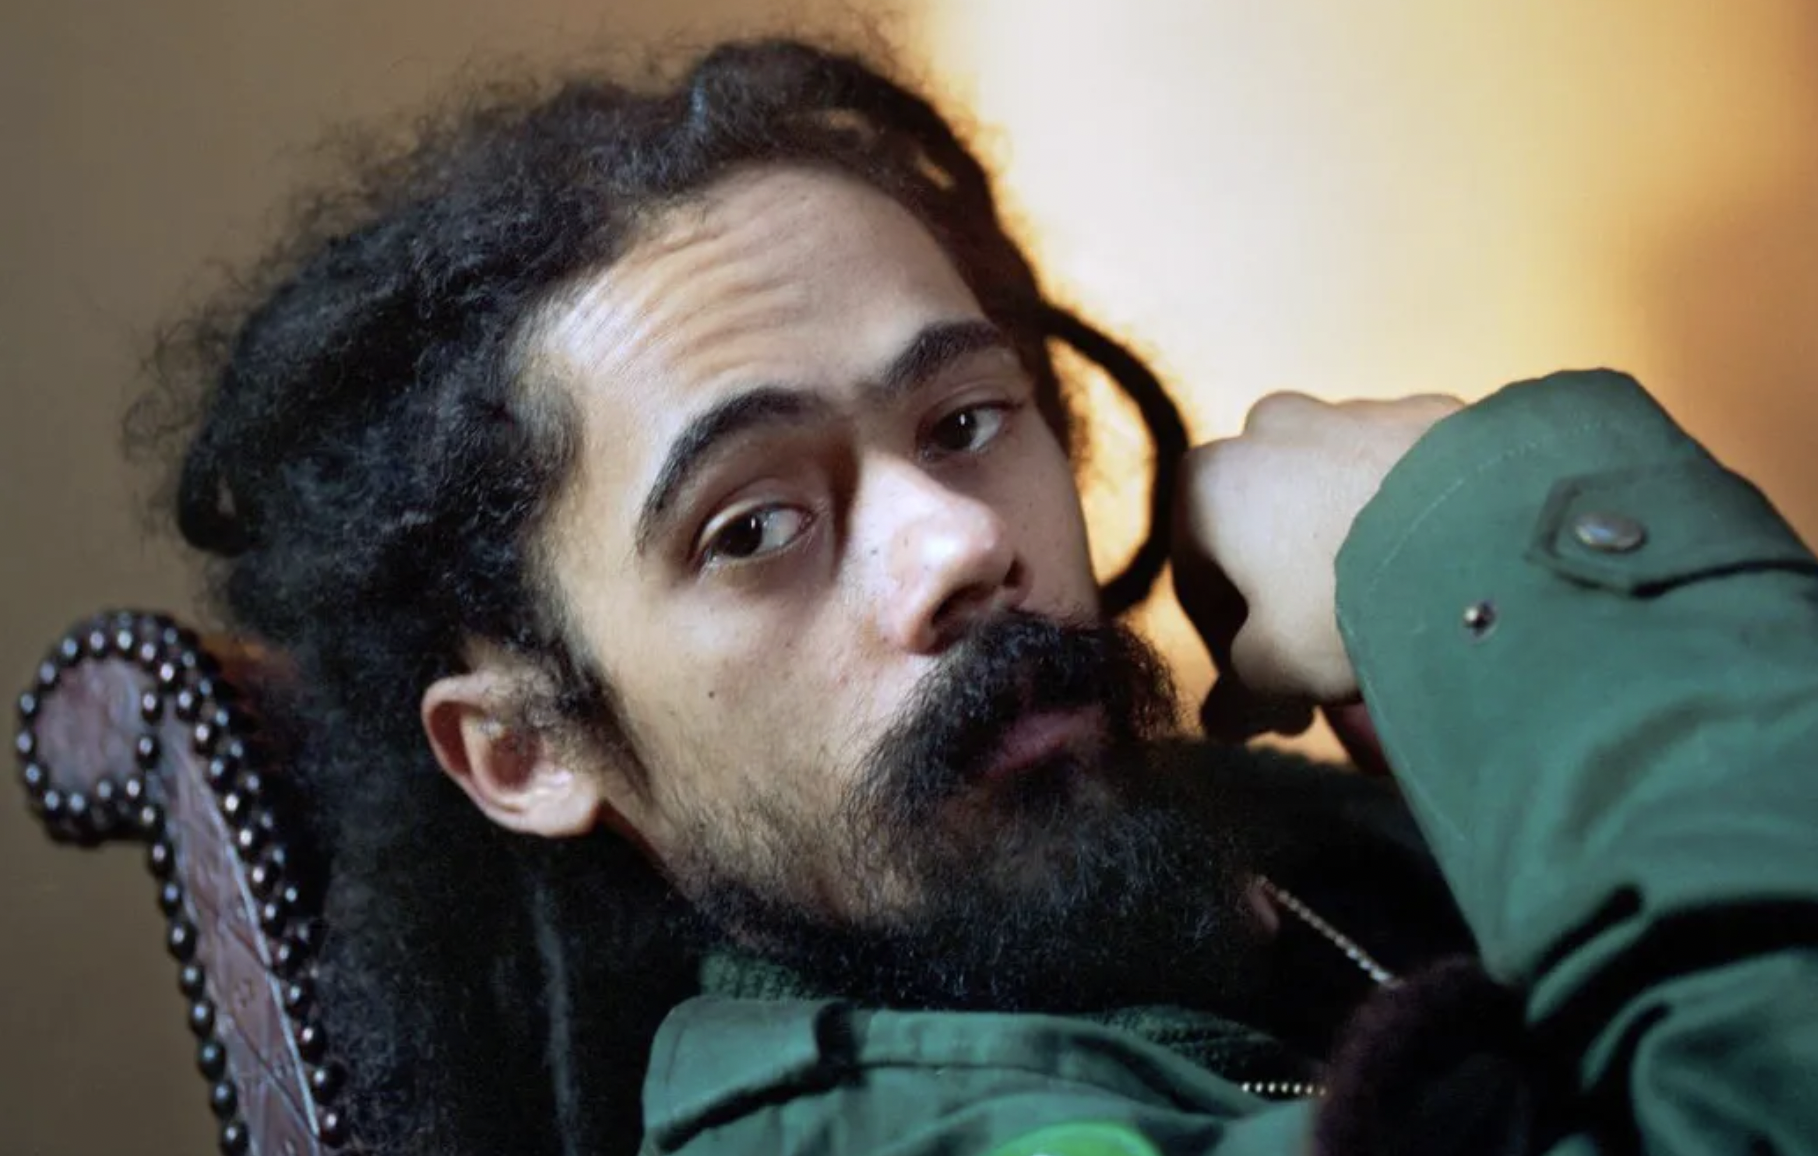 Damian Marley is the last Jamaican act to make the US Billboard 200 Chart with his fourth solo album Stony Hill